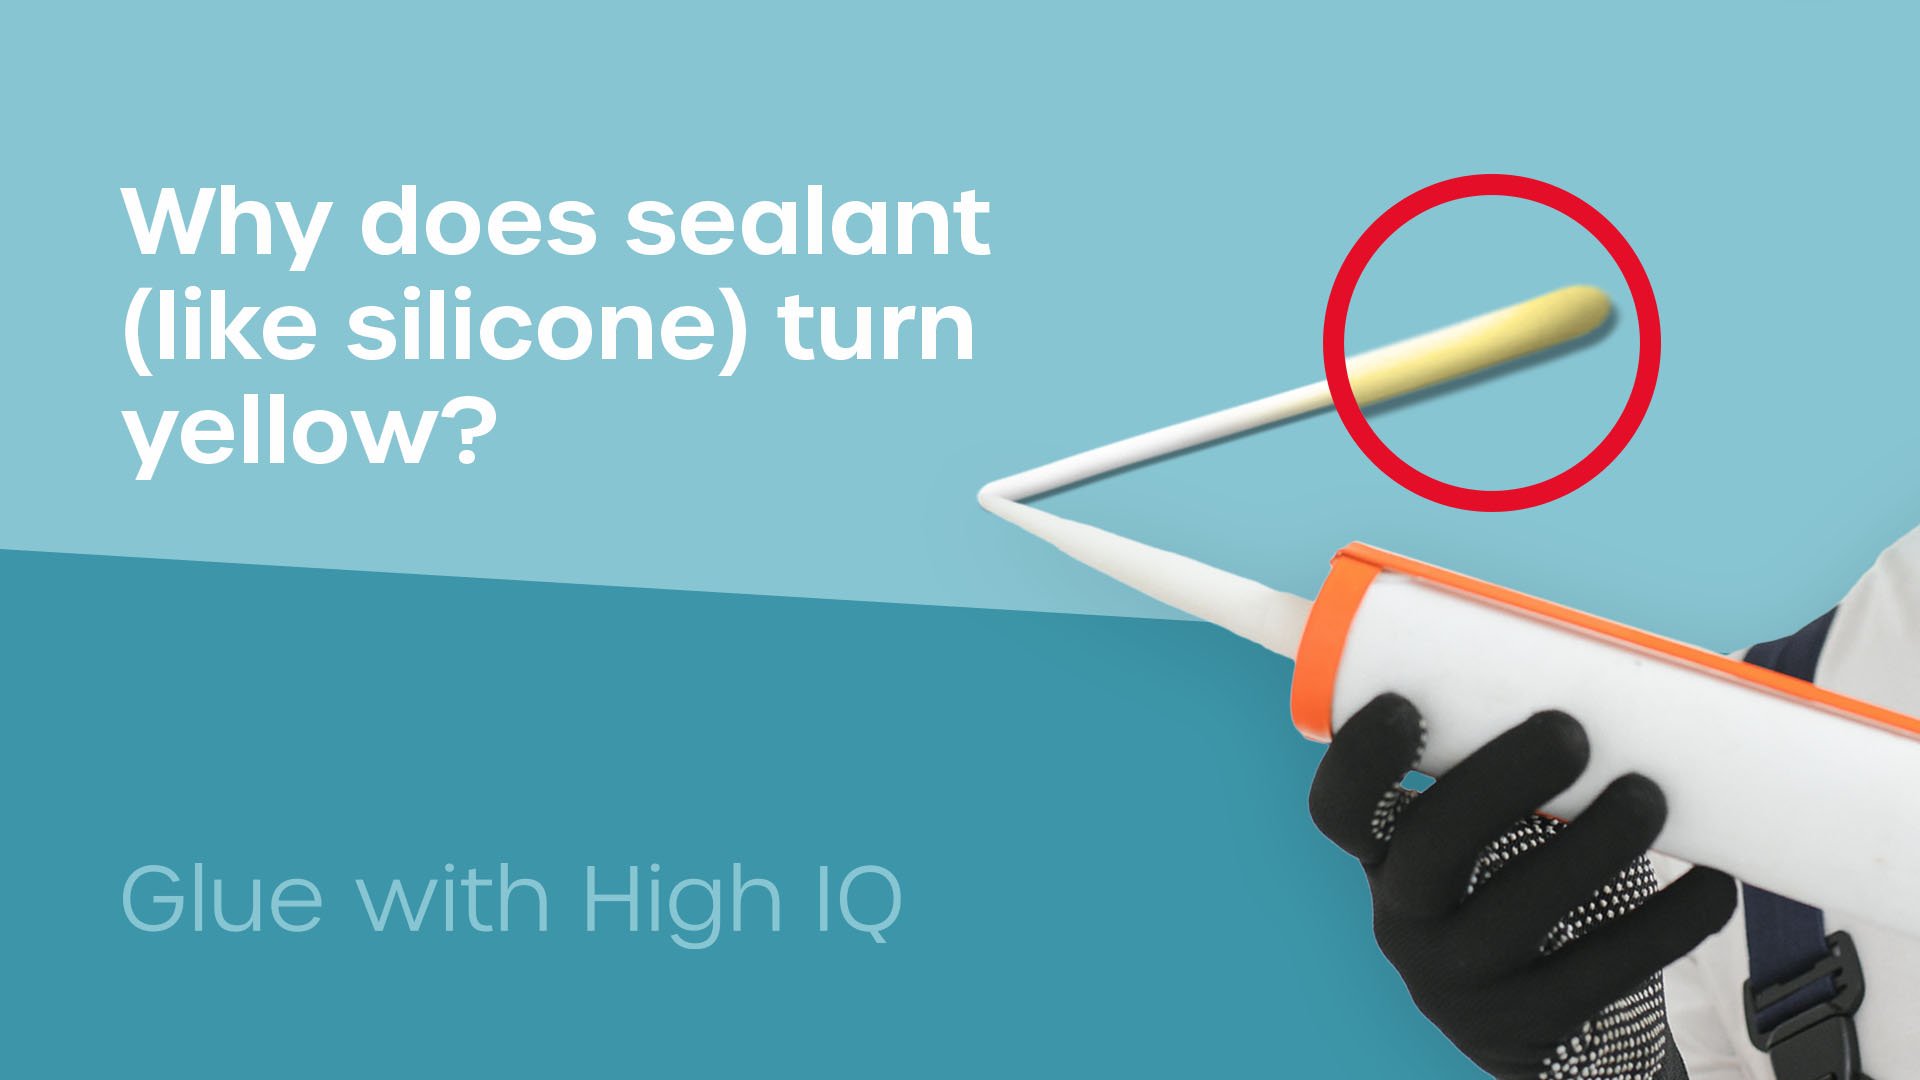 Why does Sealant go yellow?